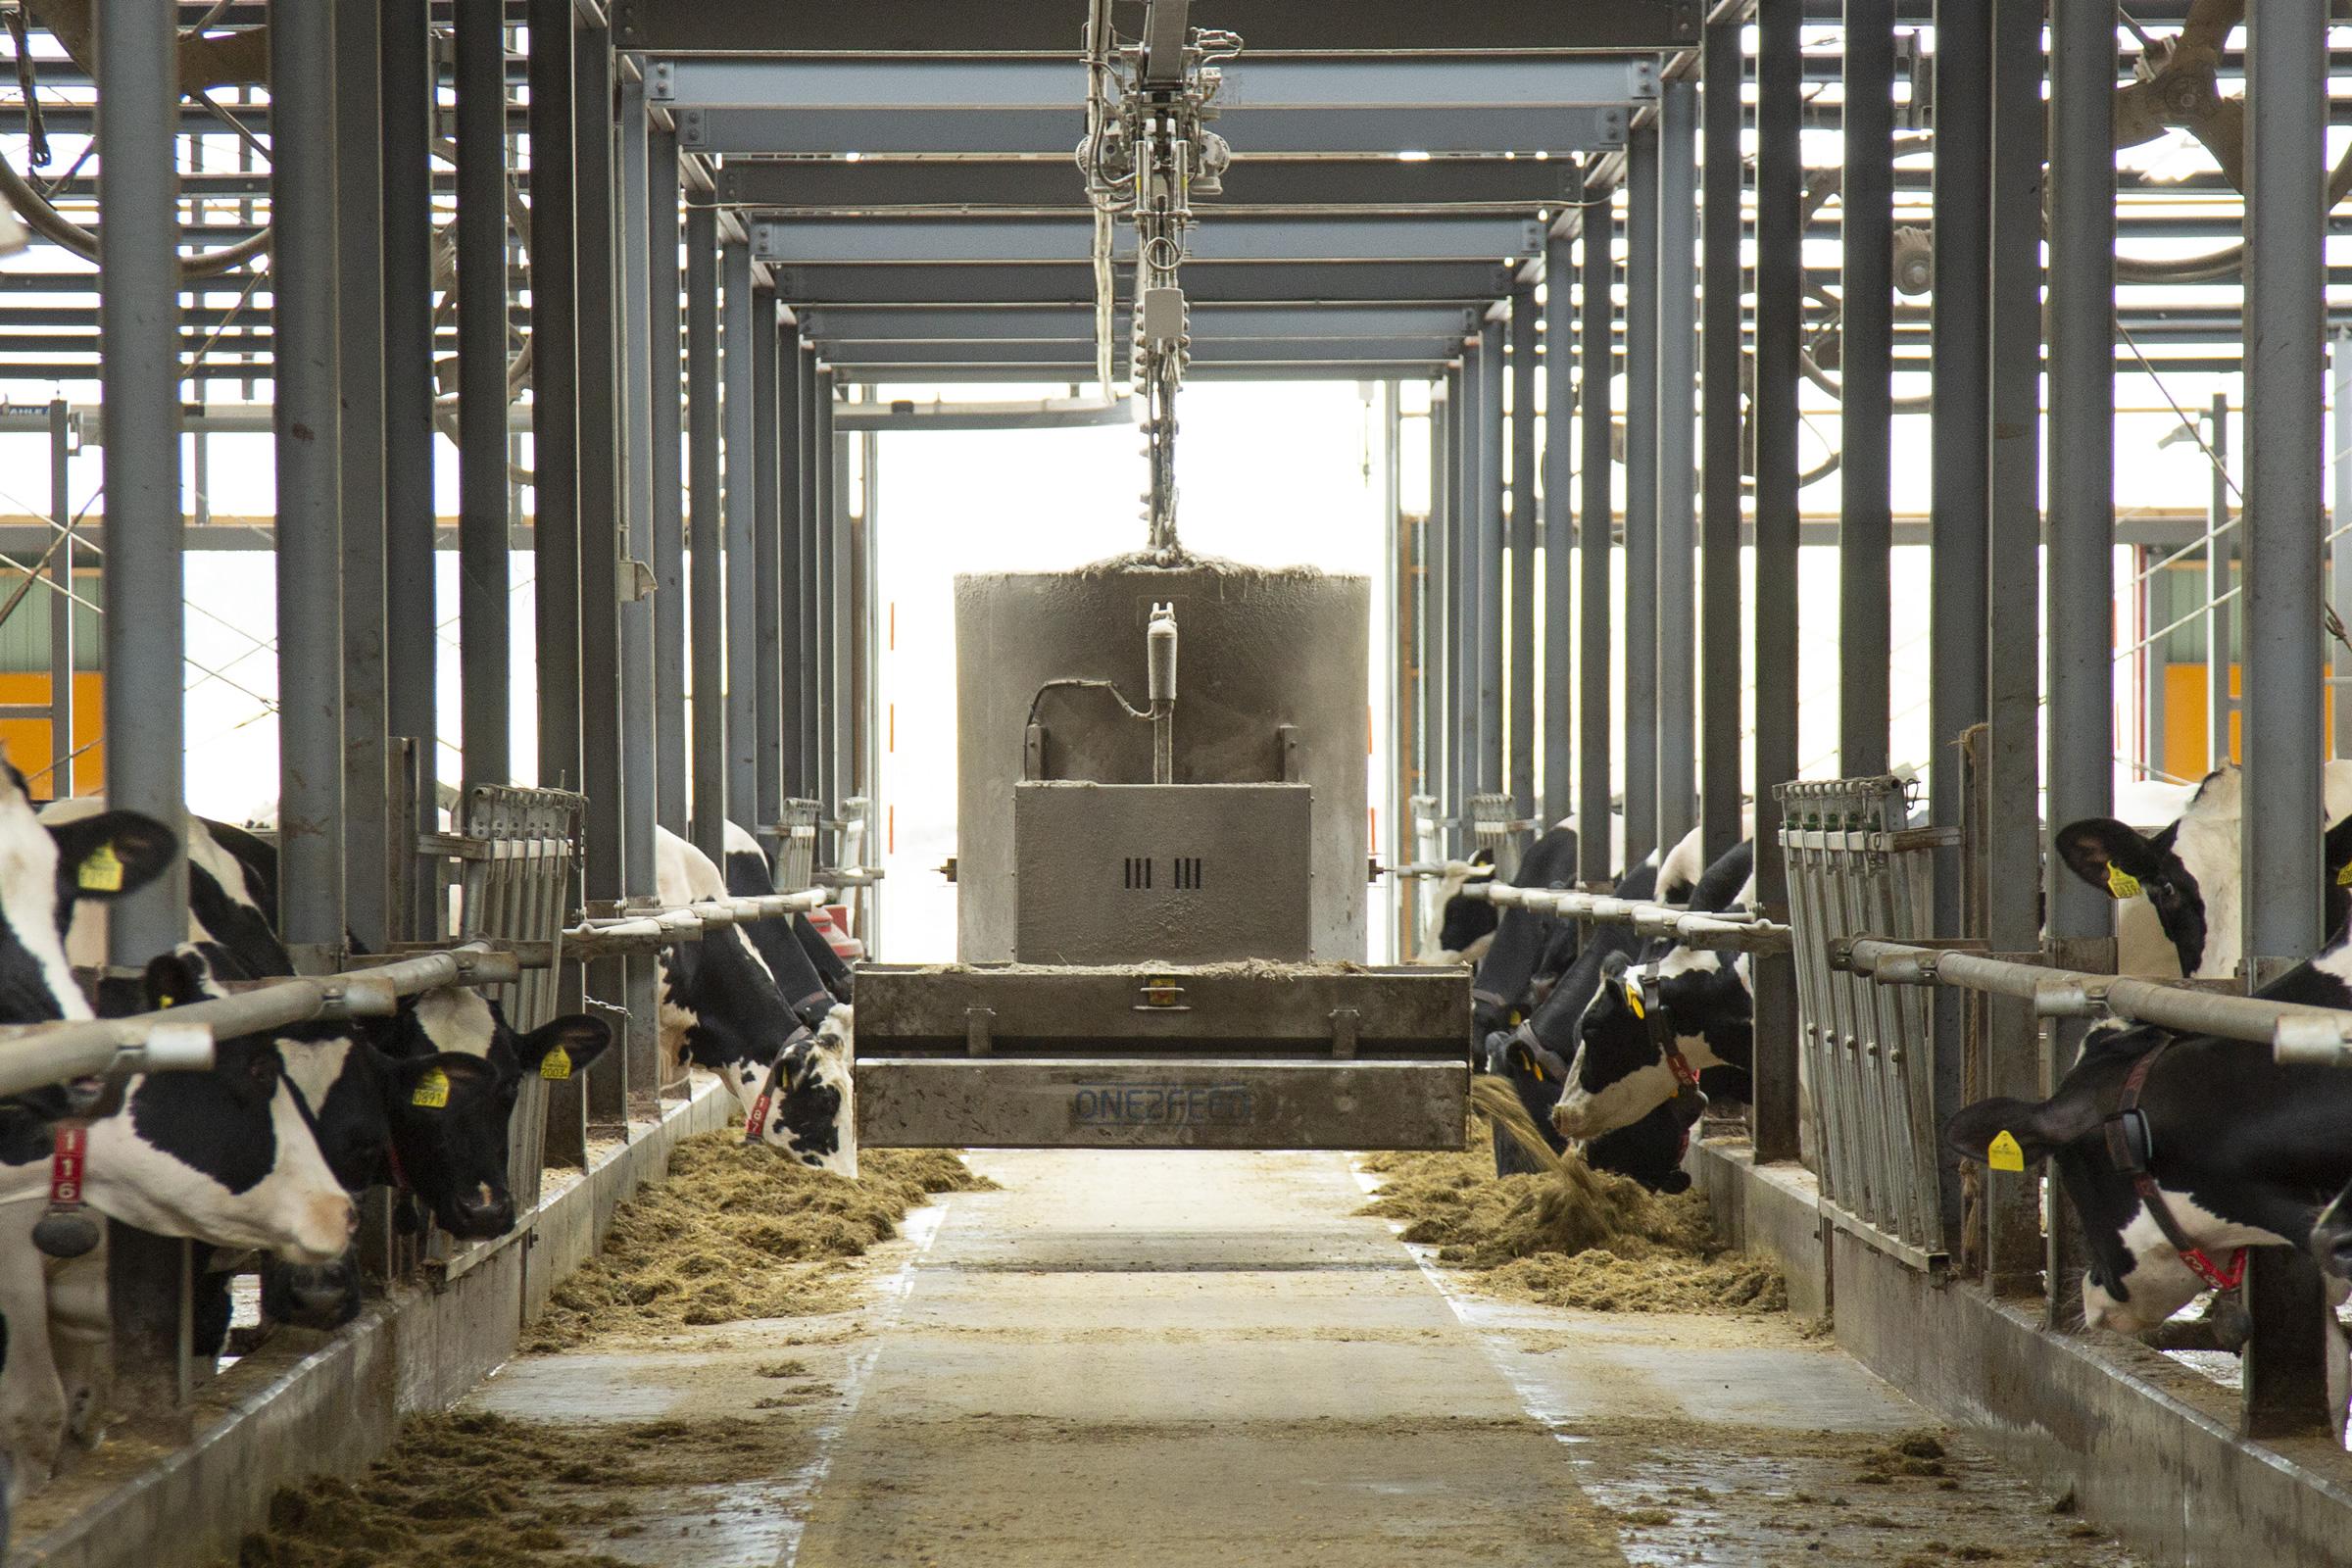 photo: The free-stall barn installed with the latest cutting-edge technologies.